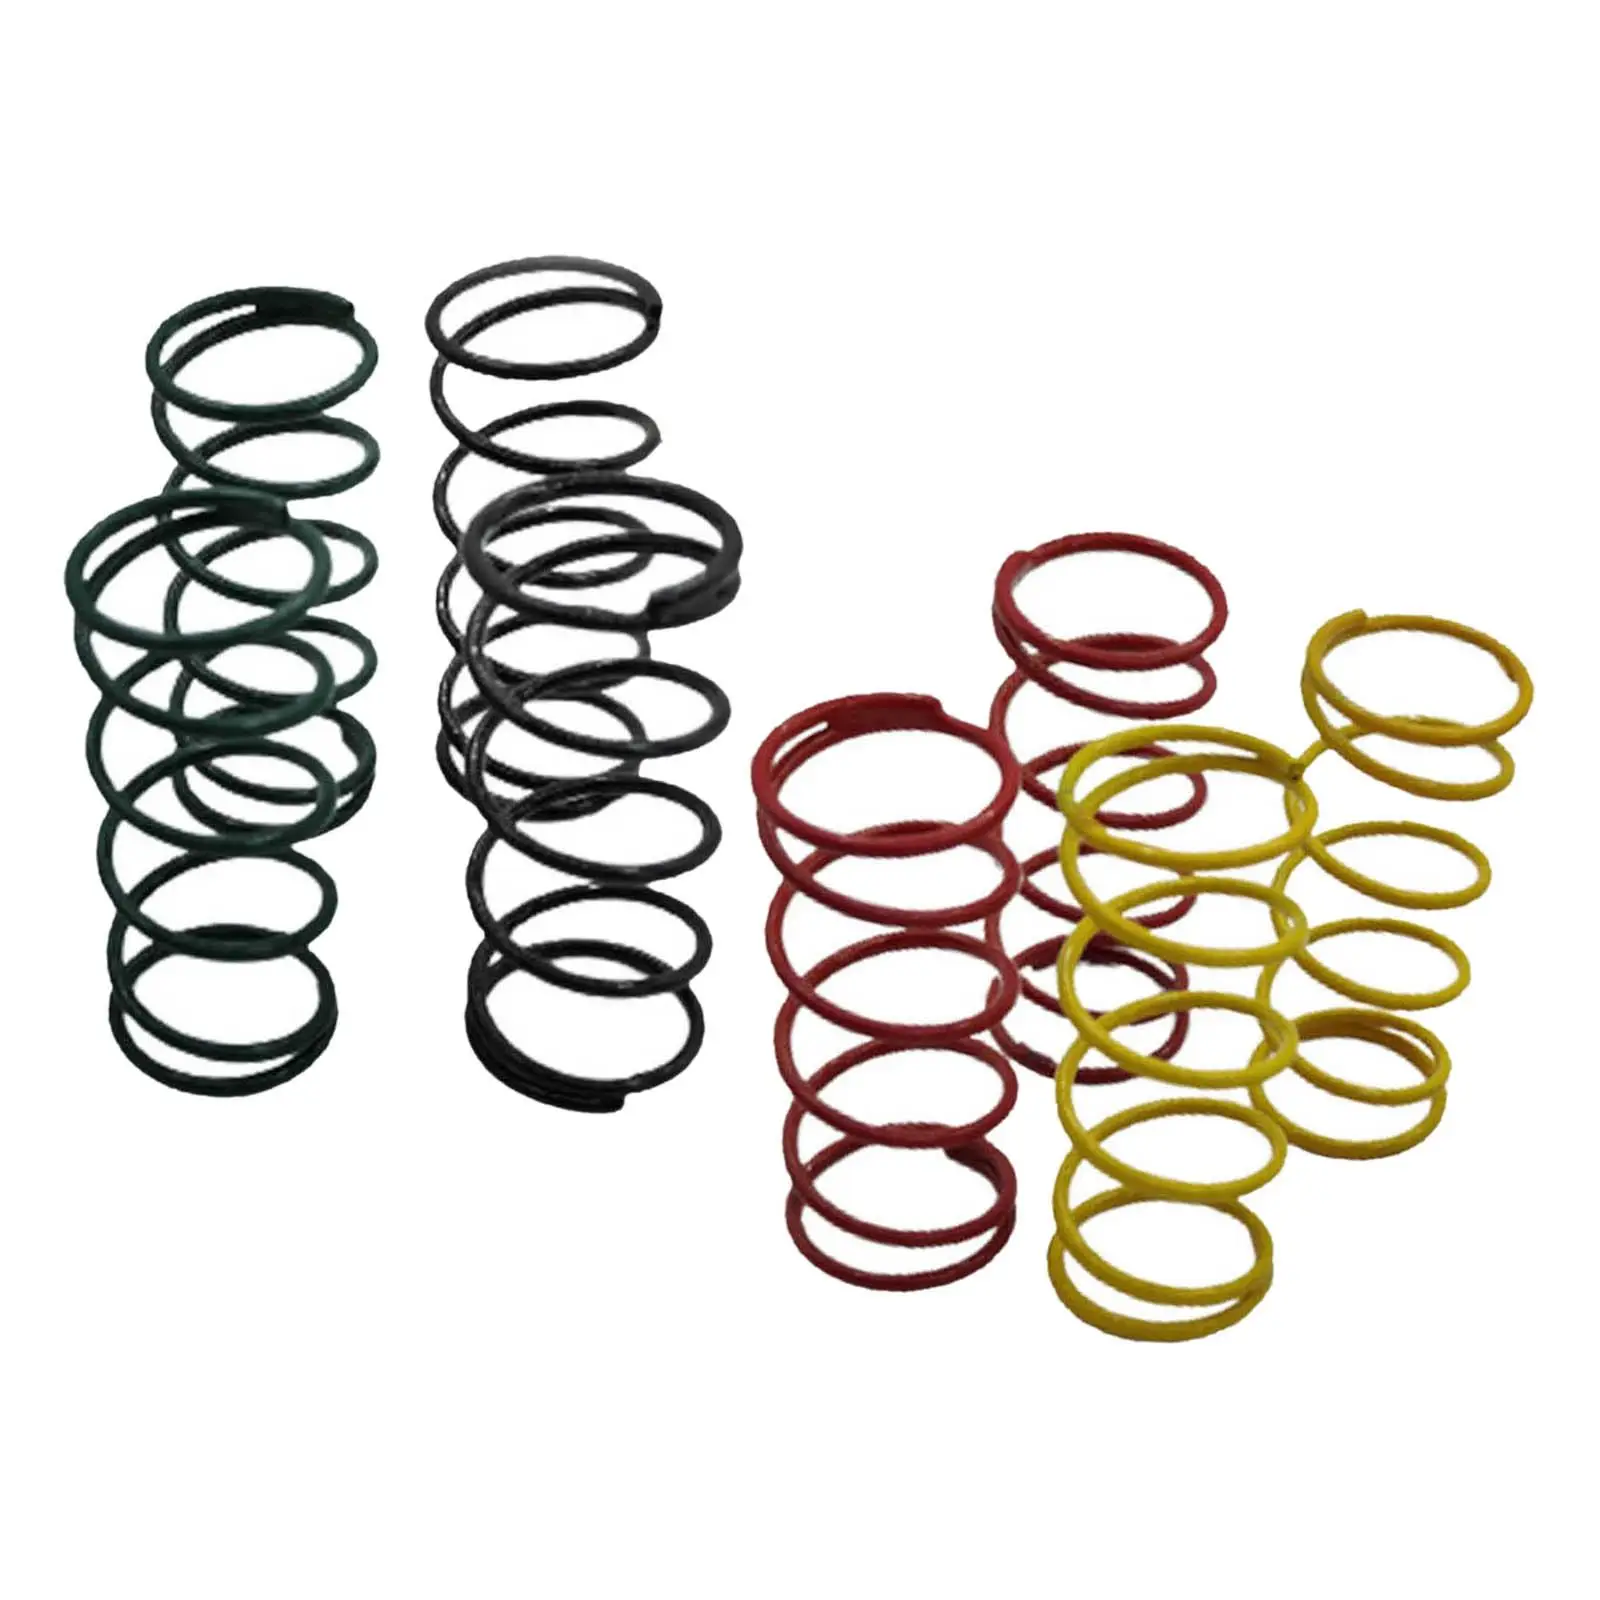 Big Bore Shock Spring Set Shocks Spring for Traxxas for RC Vehicles Truck